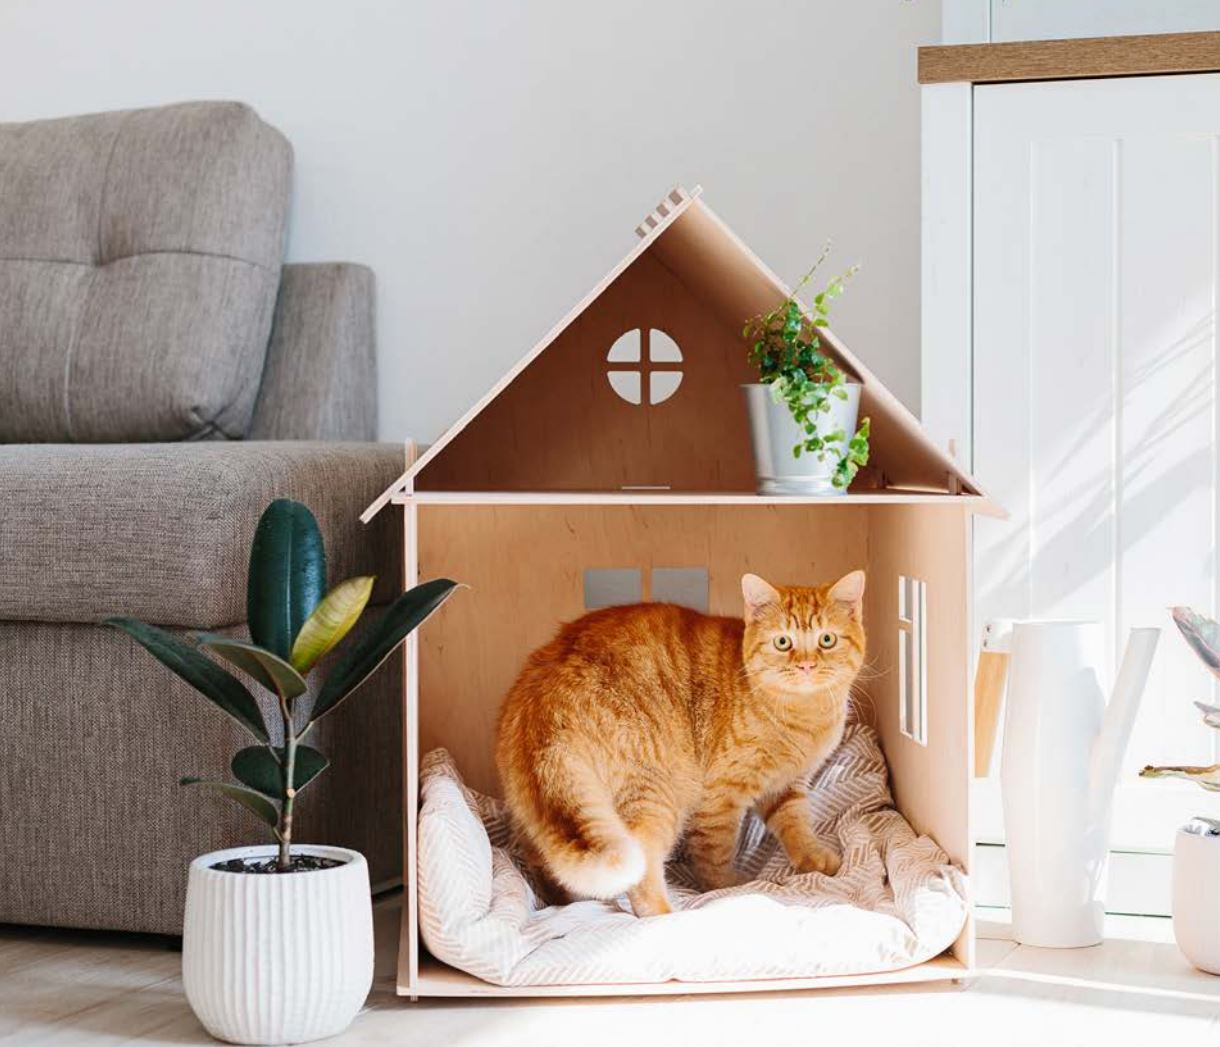 Interior Design with Pets in Mind